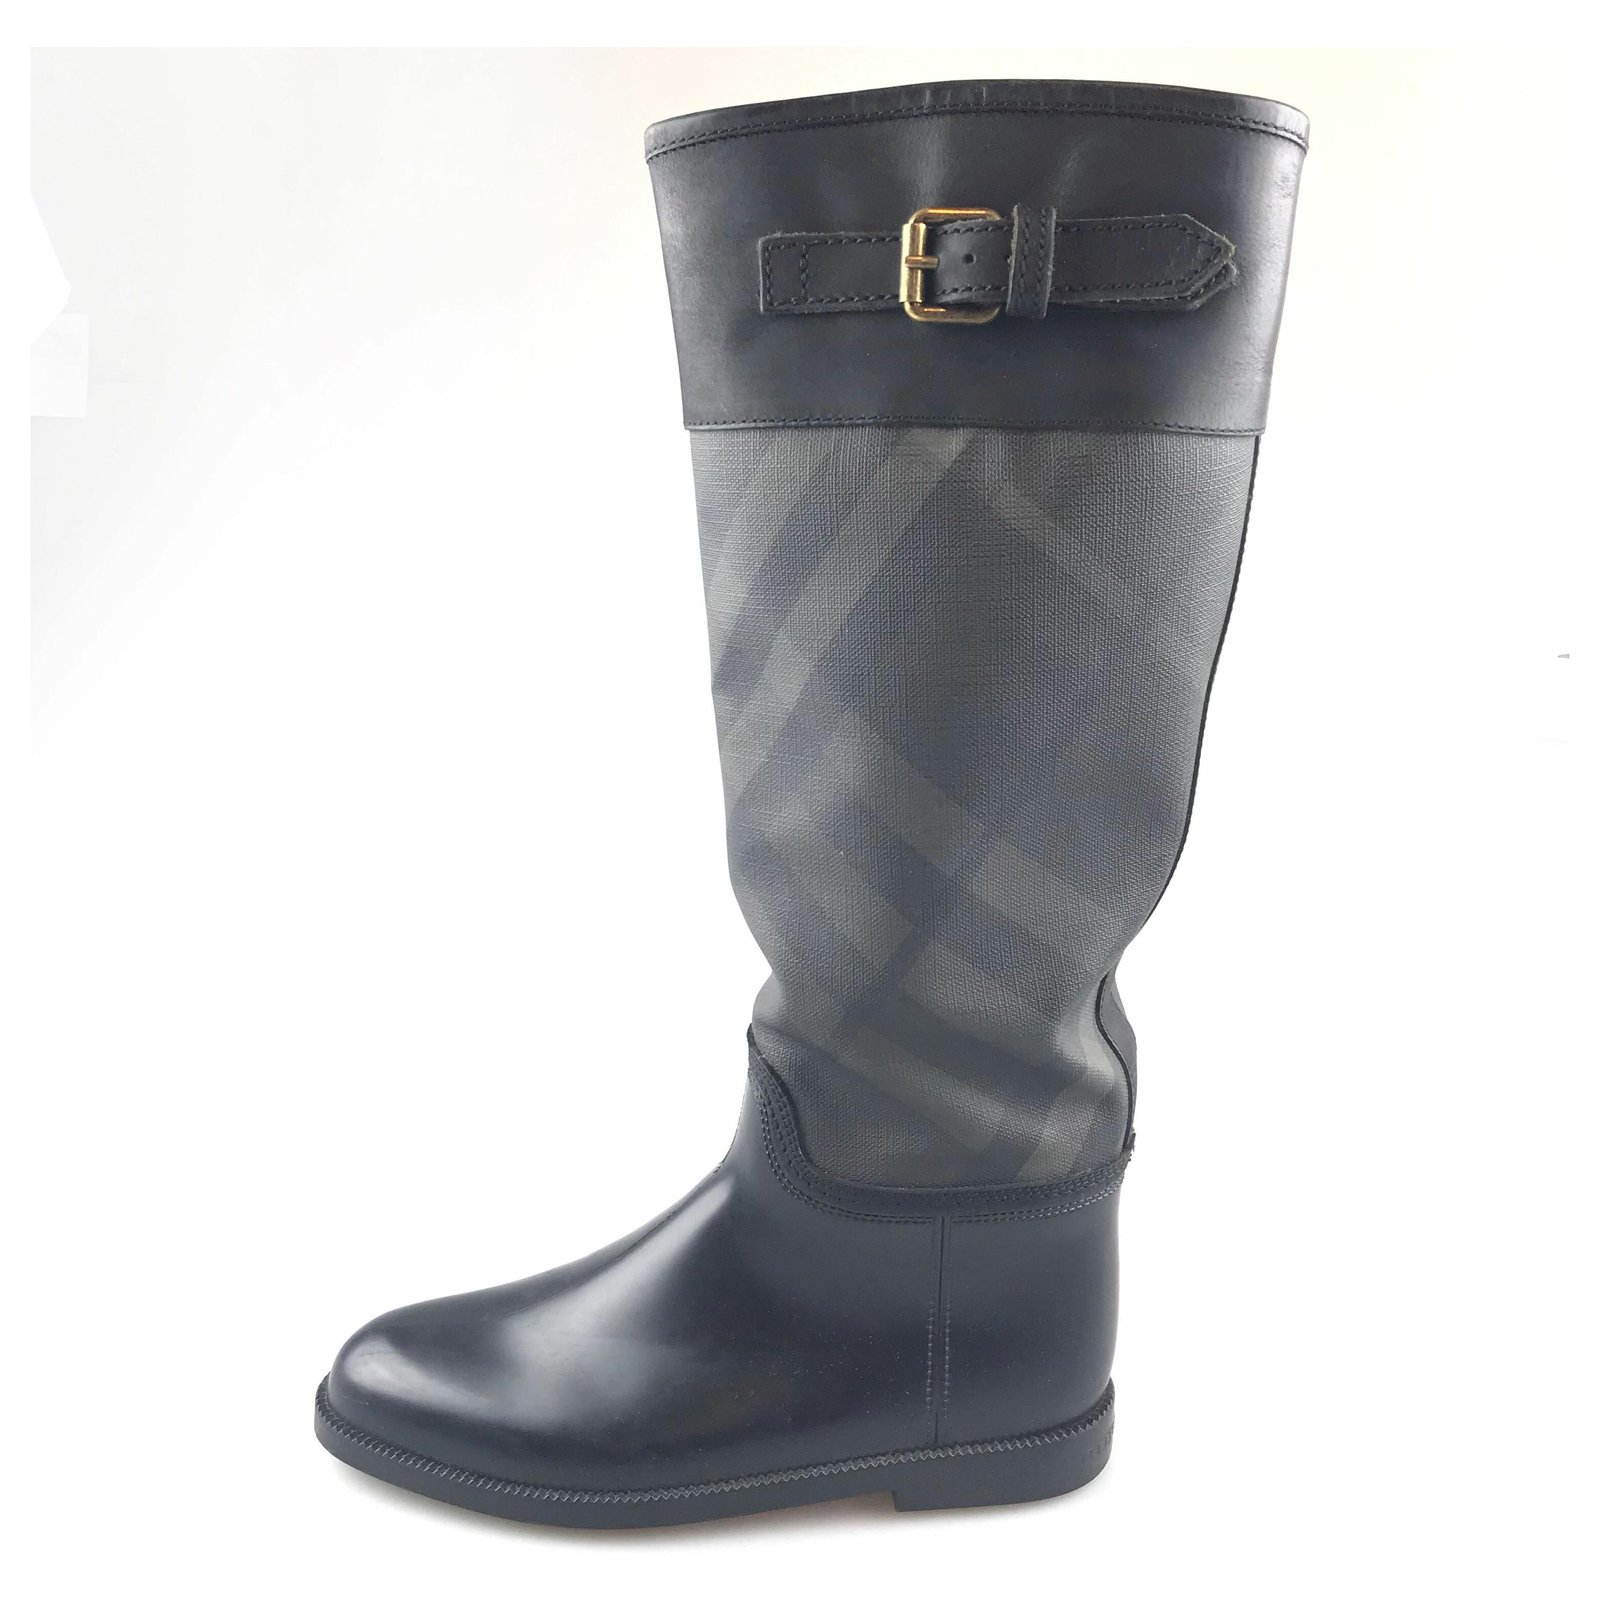 burberry riding boots